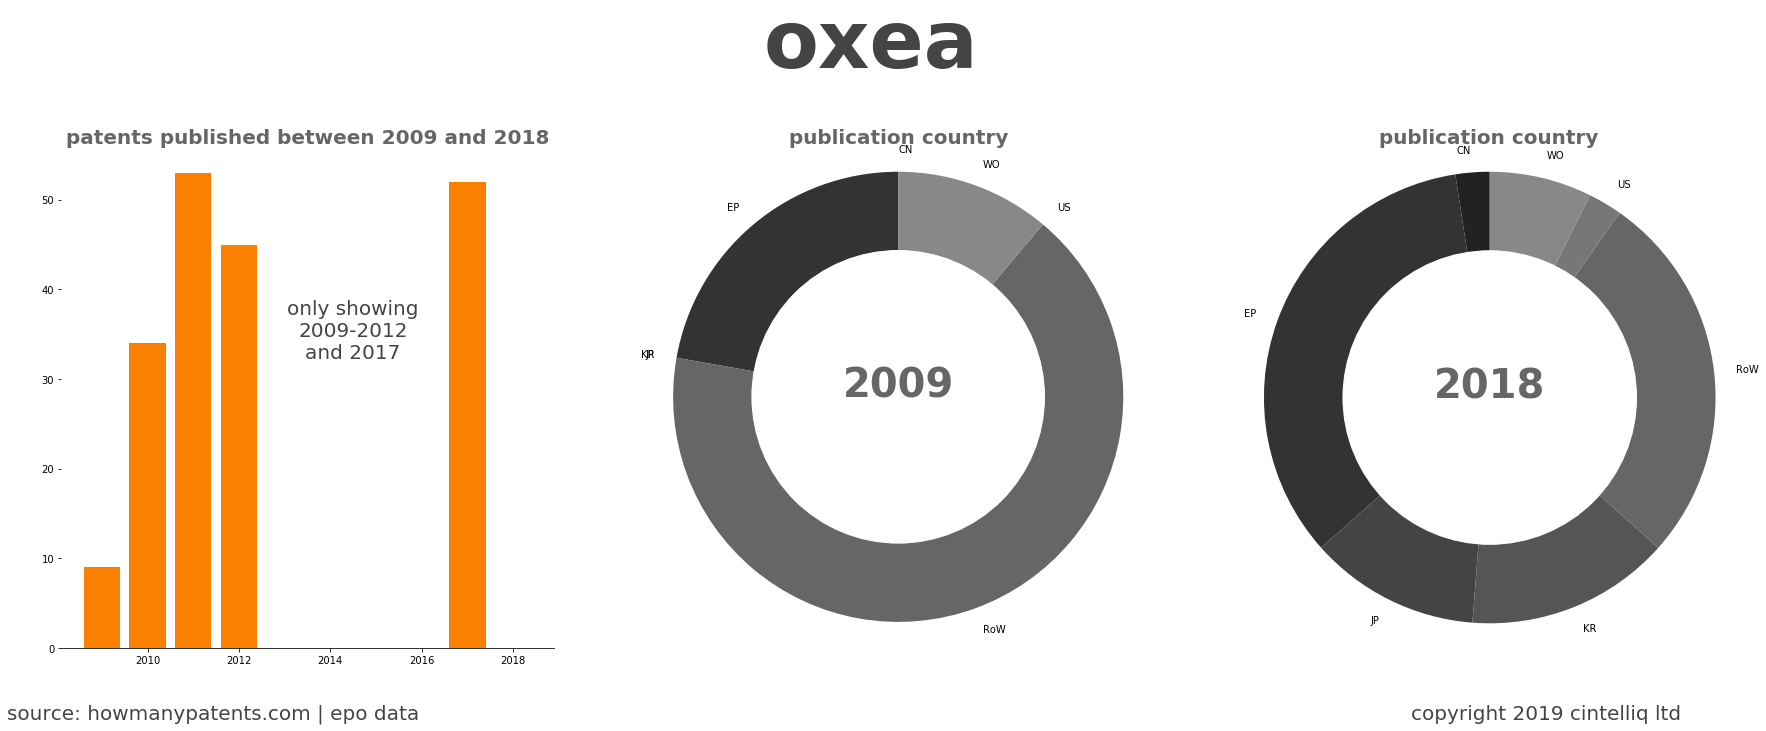 summary of patents for Oxea